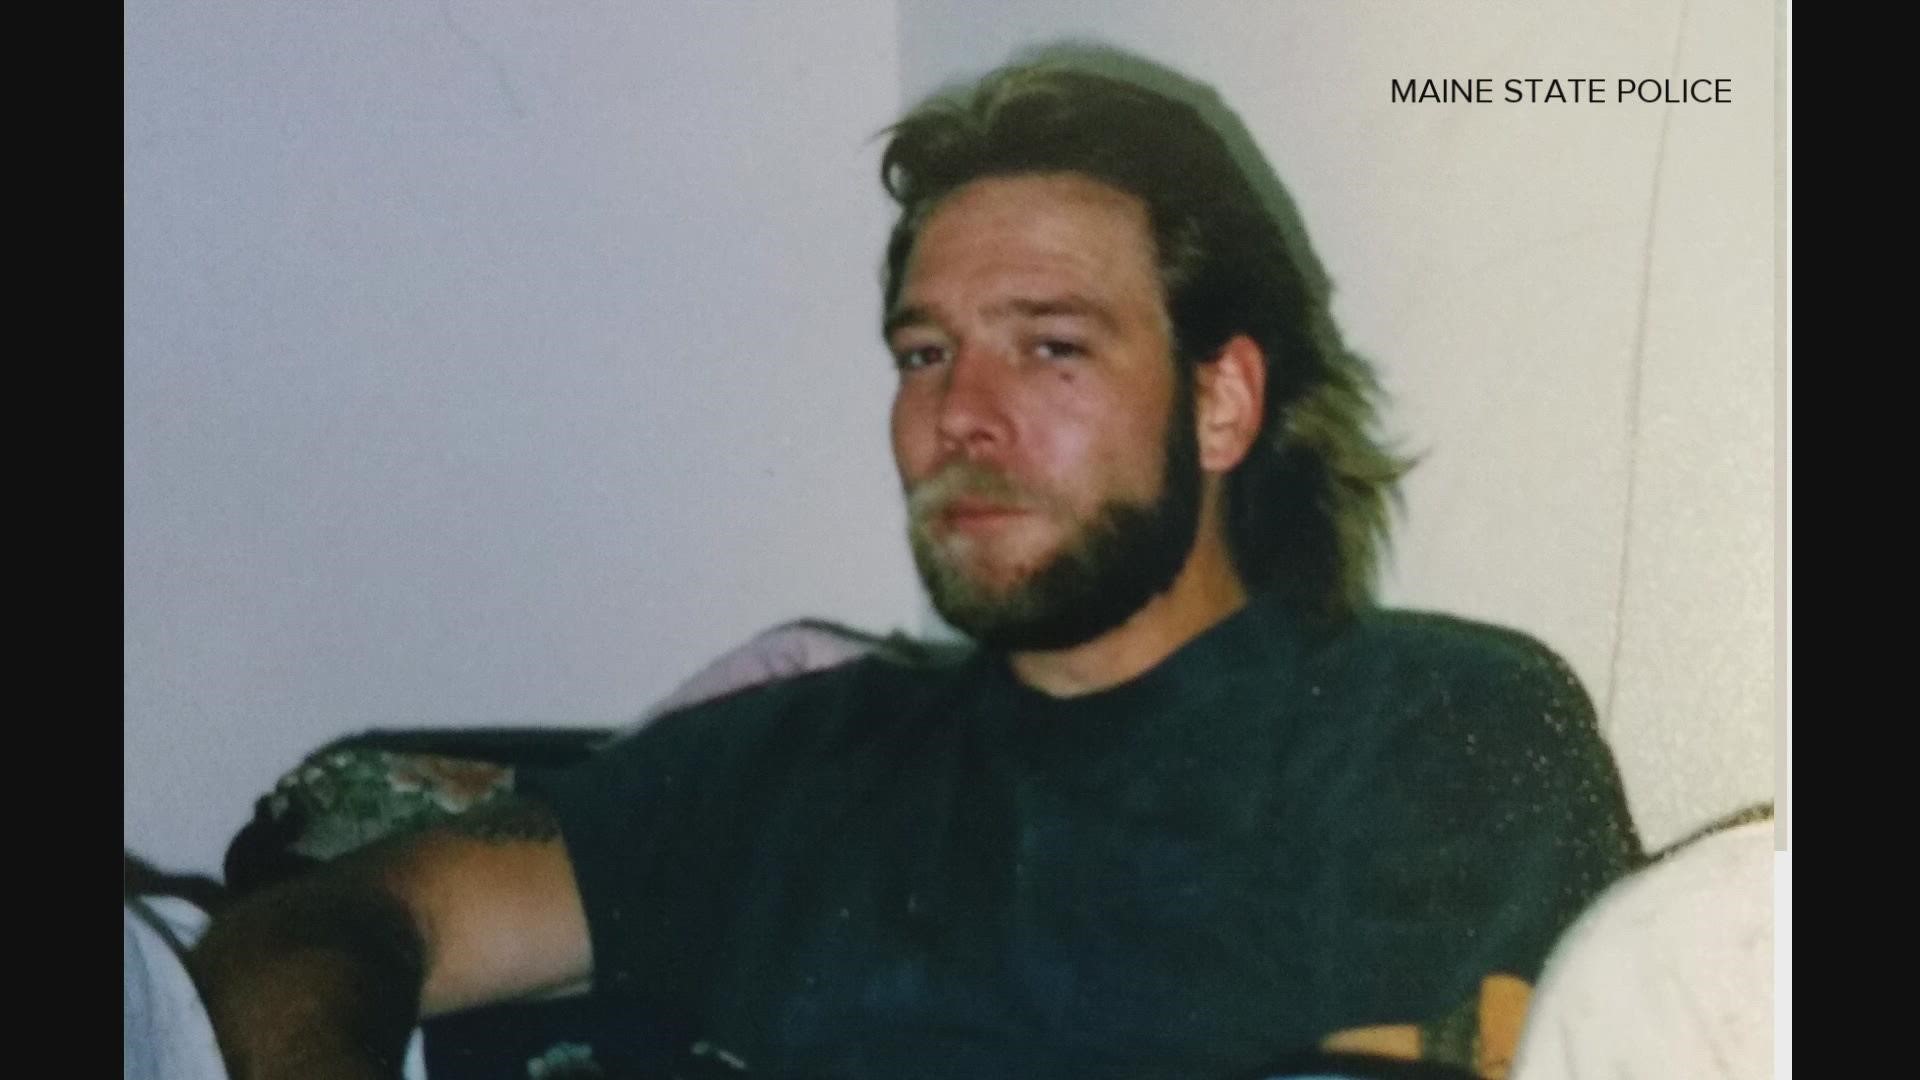 Sean Conway was last seen in Cornish in January 1991 before his body was later discovered.